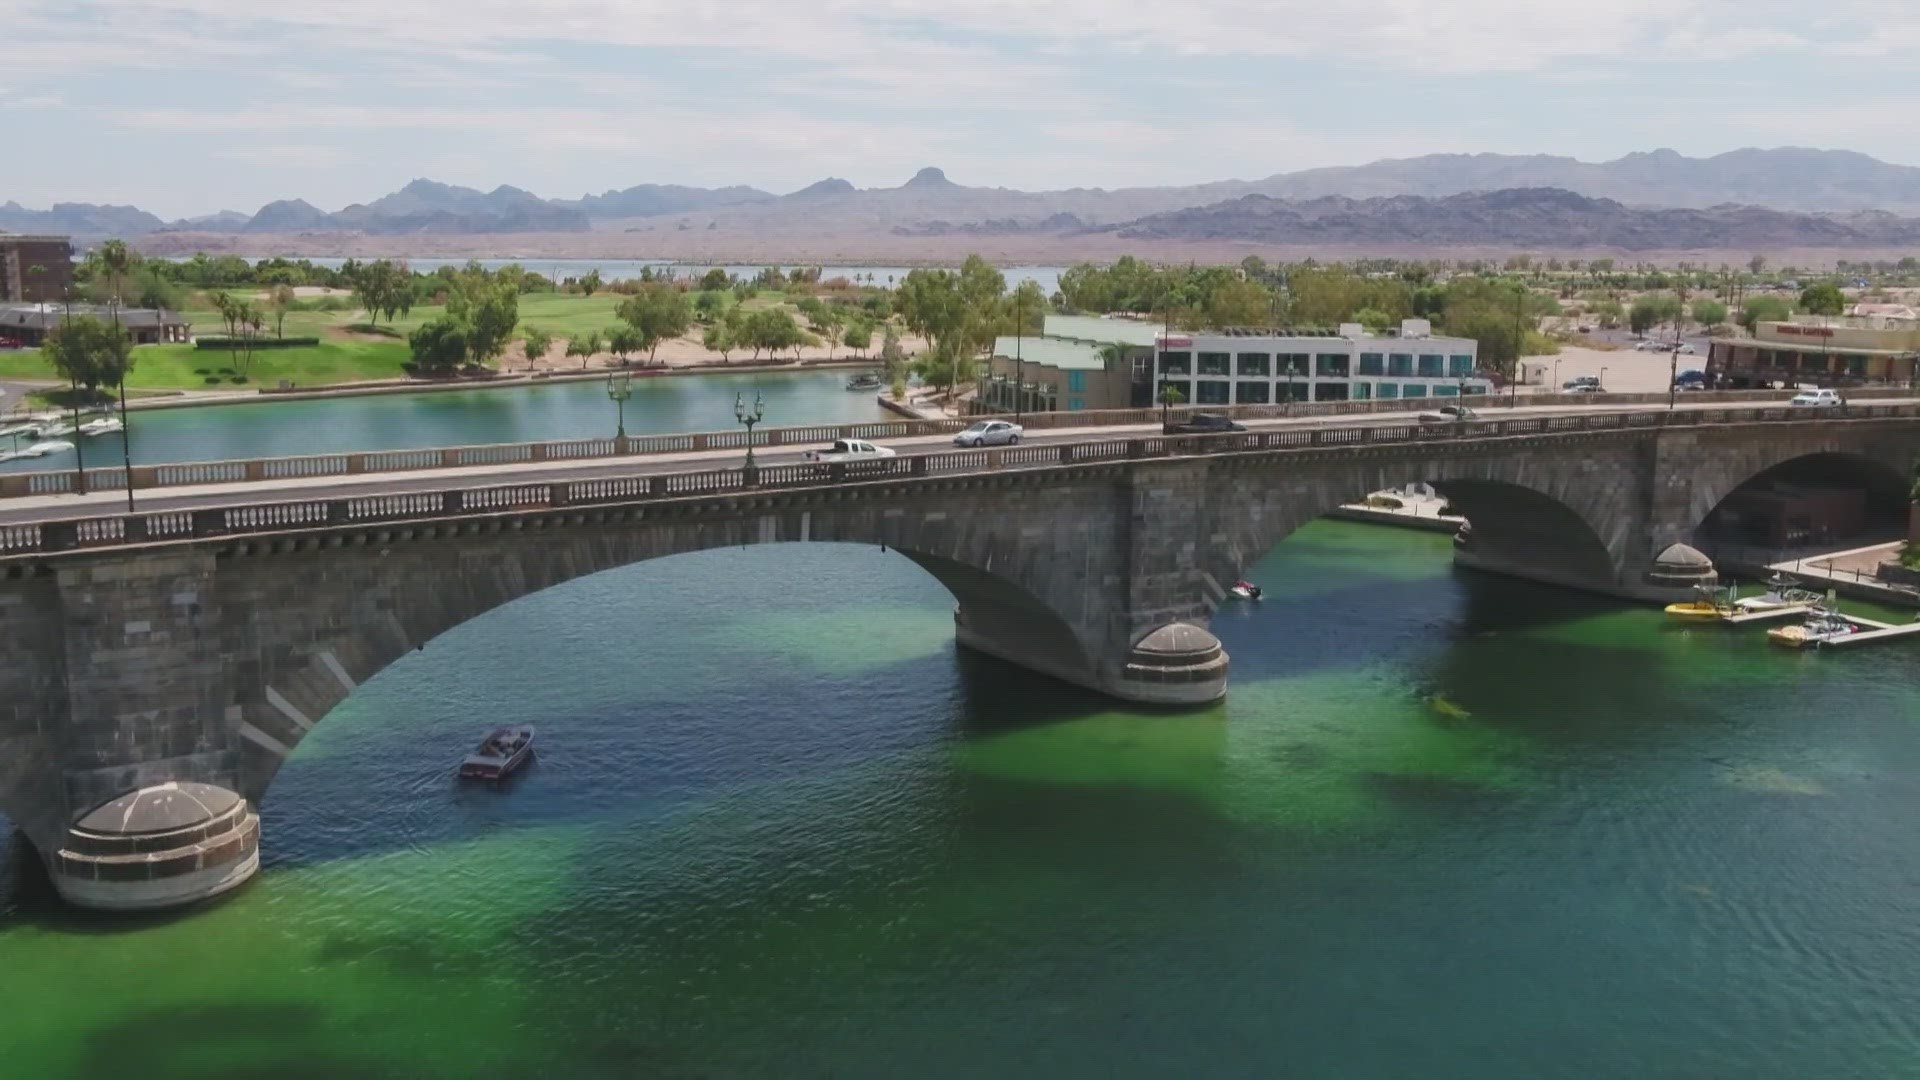 The London Bridge was moved from England to Lake Havasu City in the late 1960's.